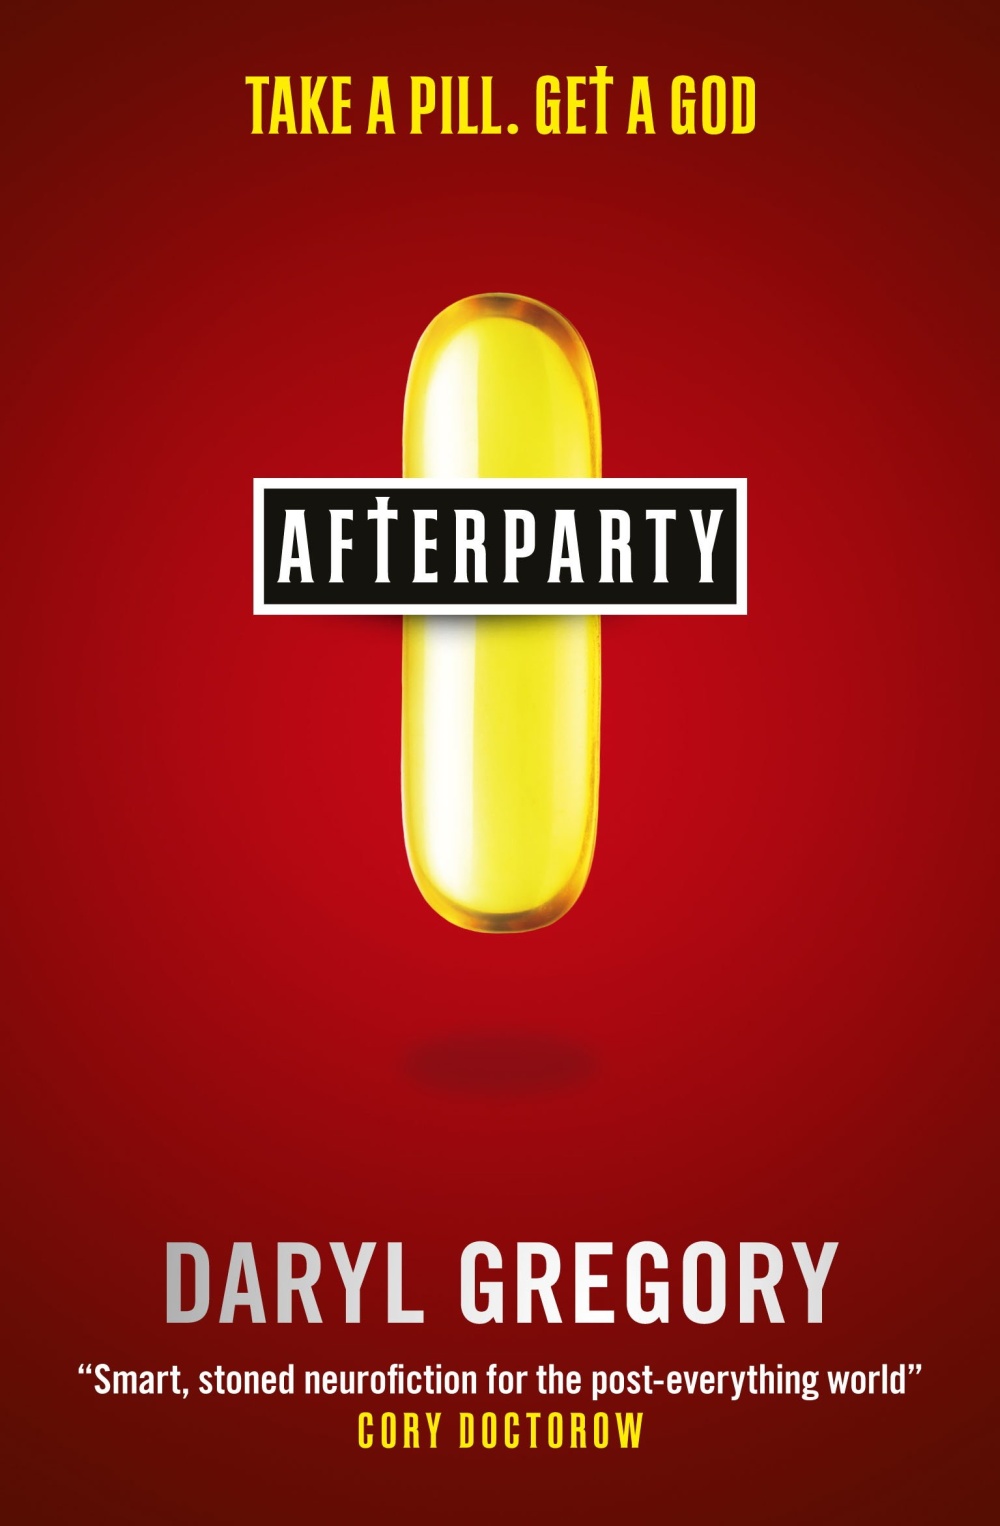 Cover des Buches "Afterparty" von Daryl Gregory